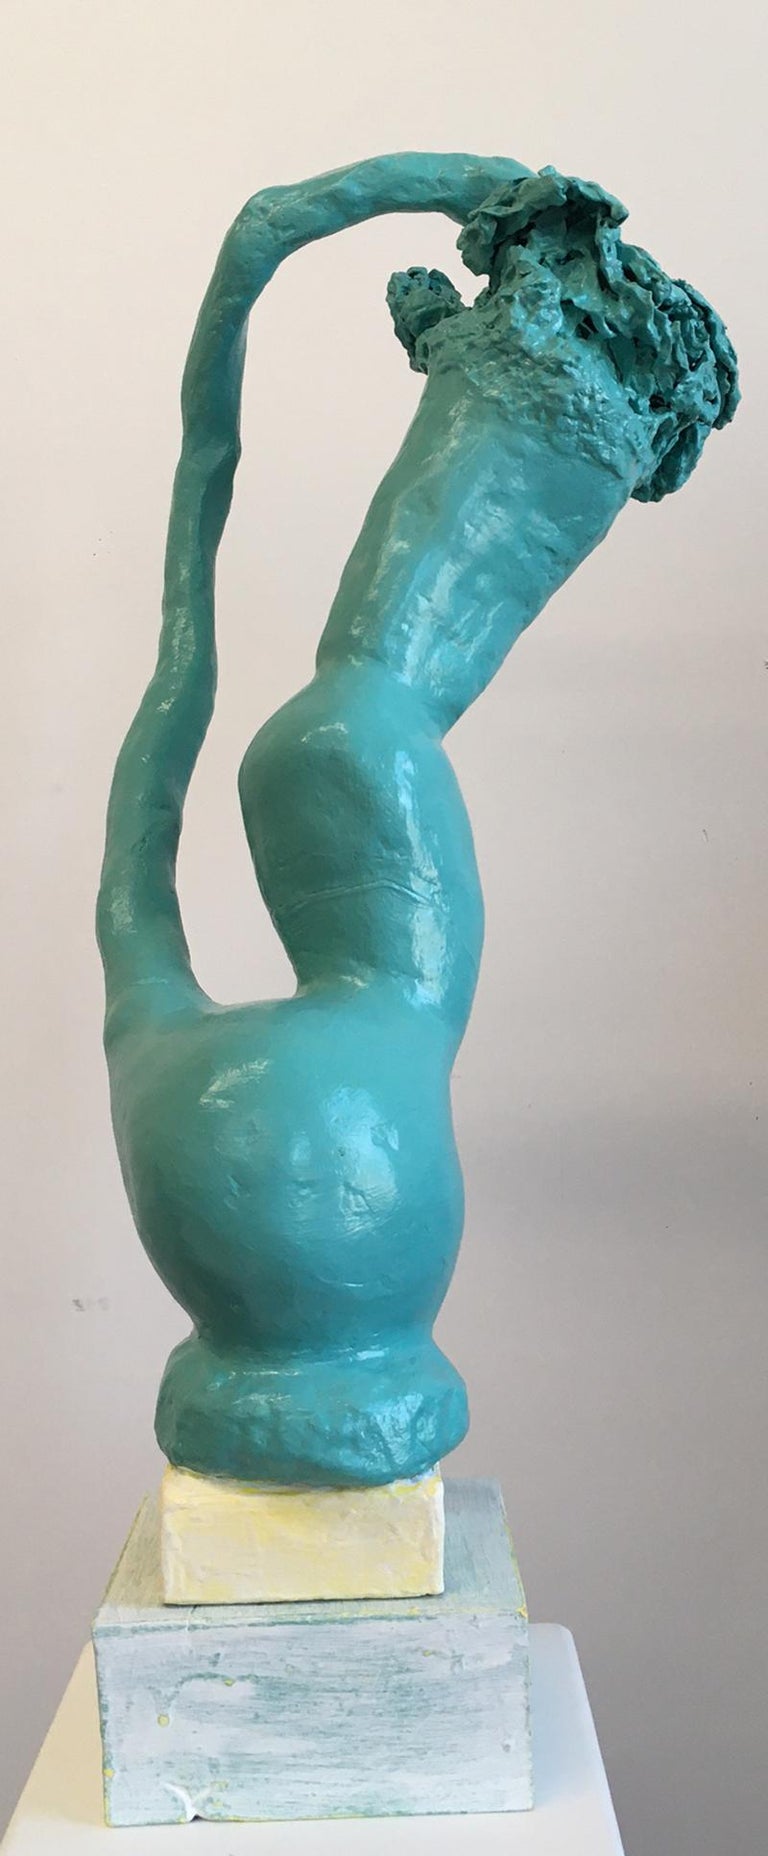 Contemporary Conceptual Ceramic Sculpture Turquoise Female Artist Unique Object - Gray Abstract Sculpture by Roberley Bell